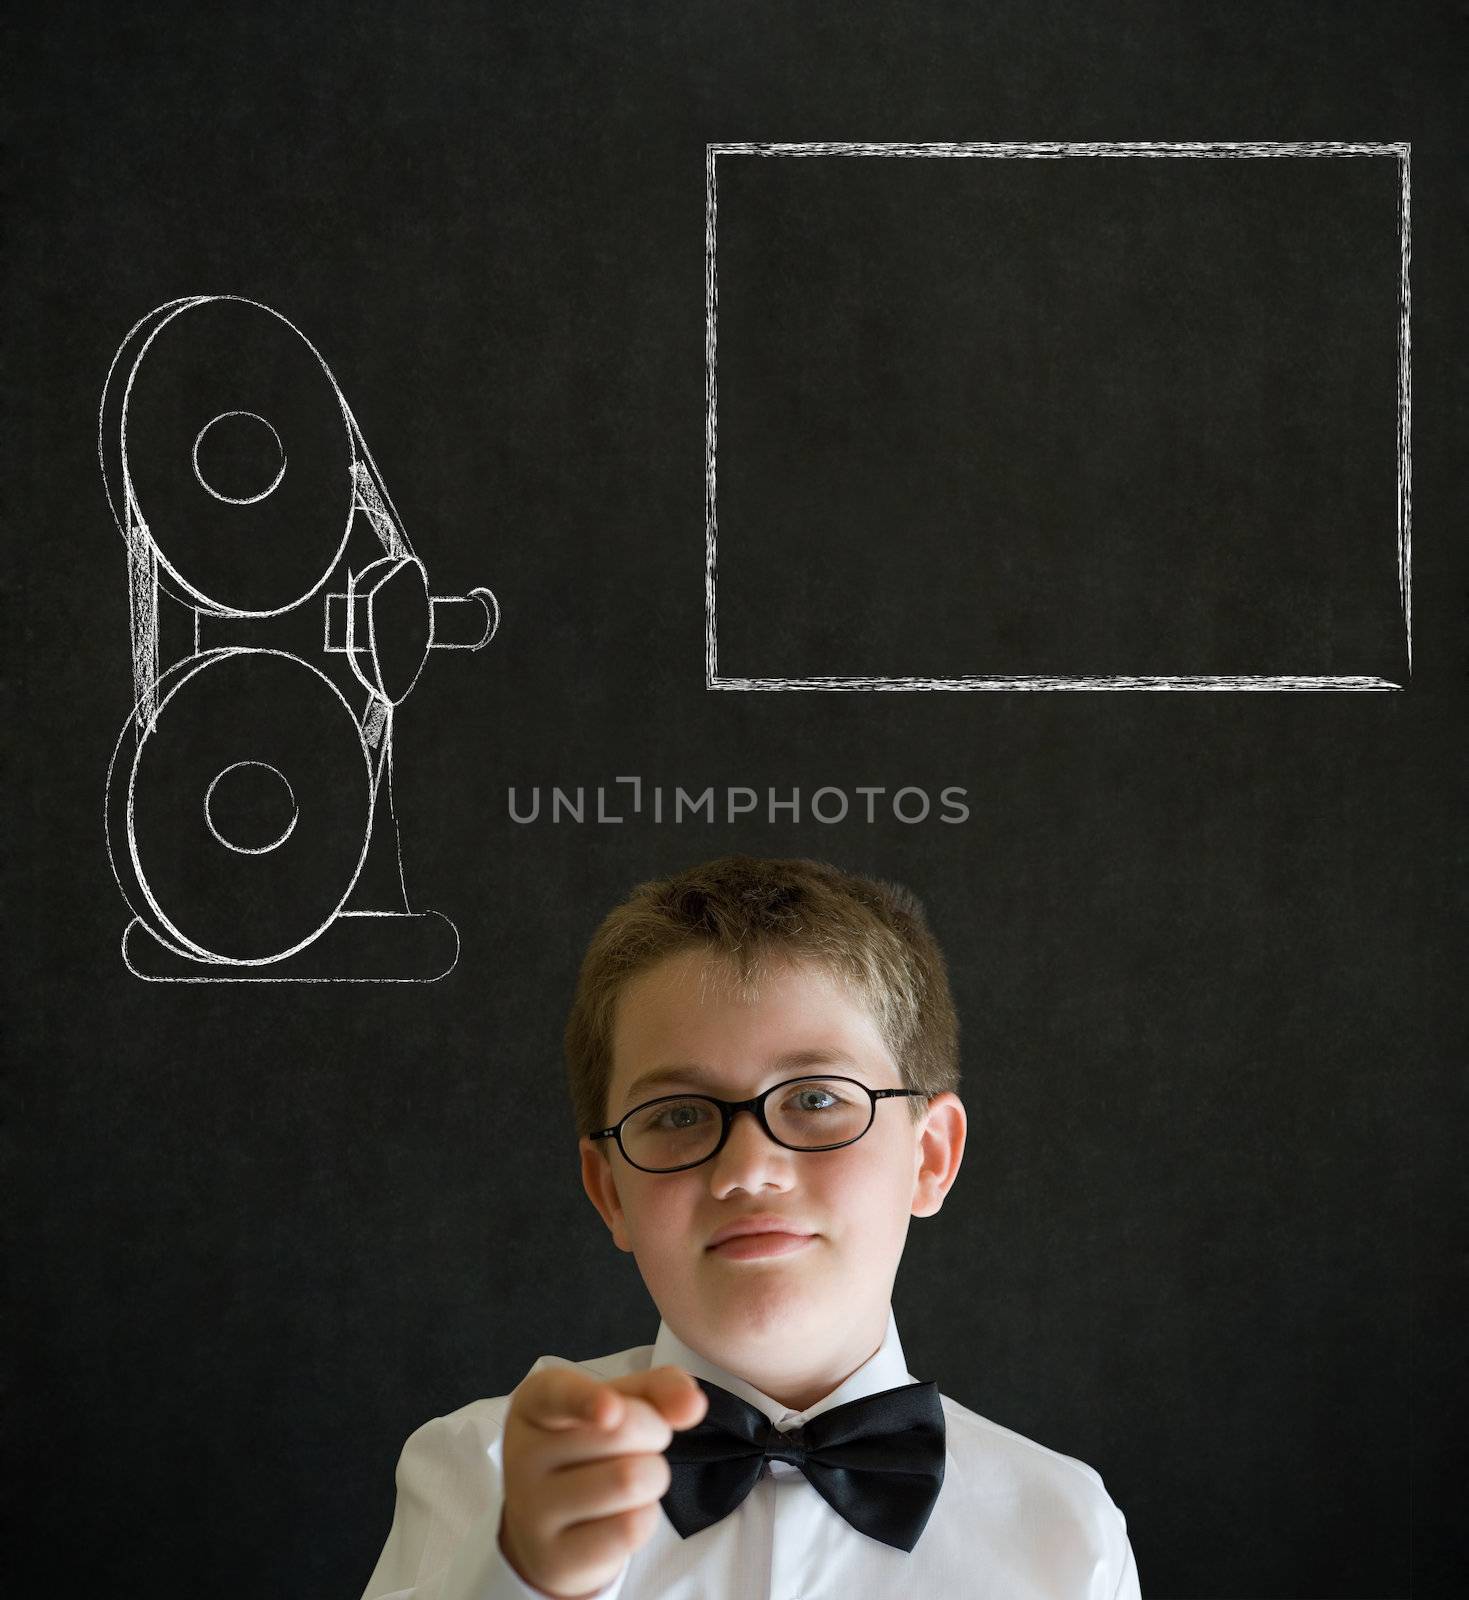 Education needs you thinking boy dressed up as business man with retro chalk film projector on blackboard background